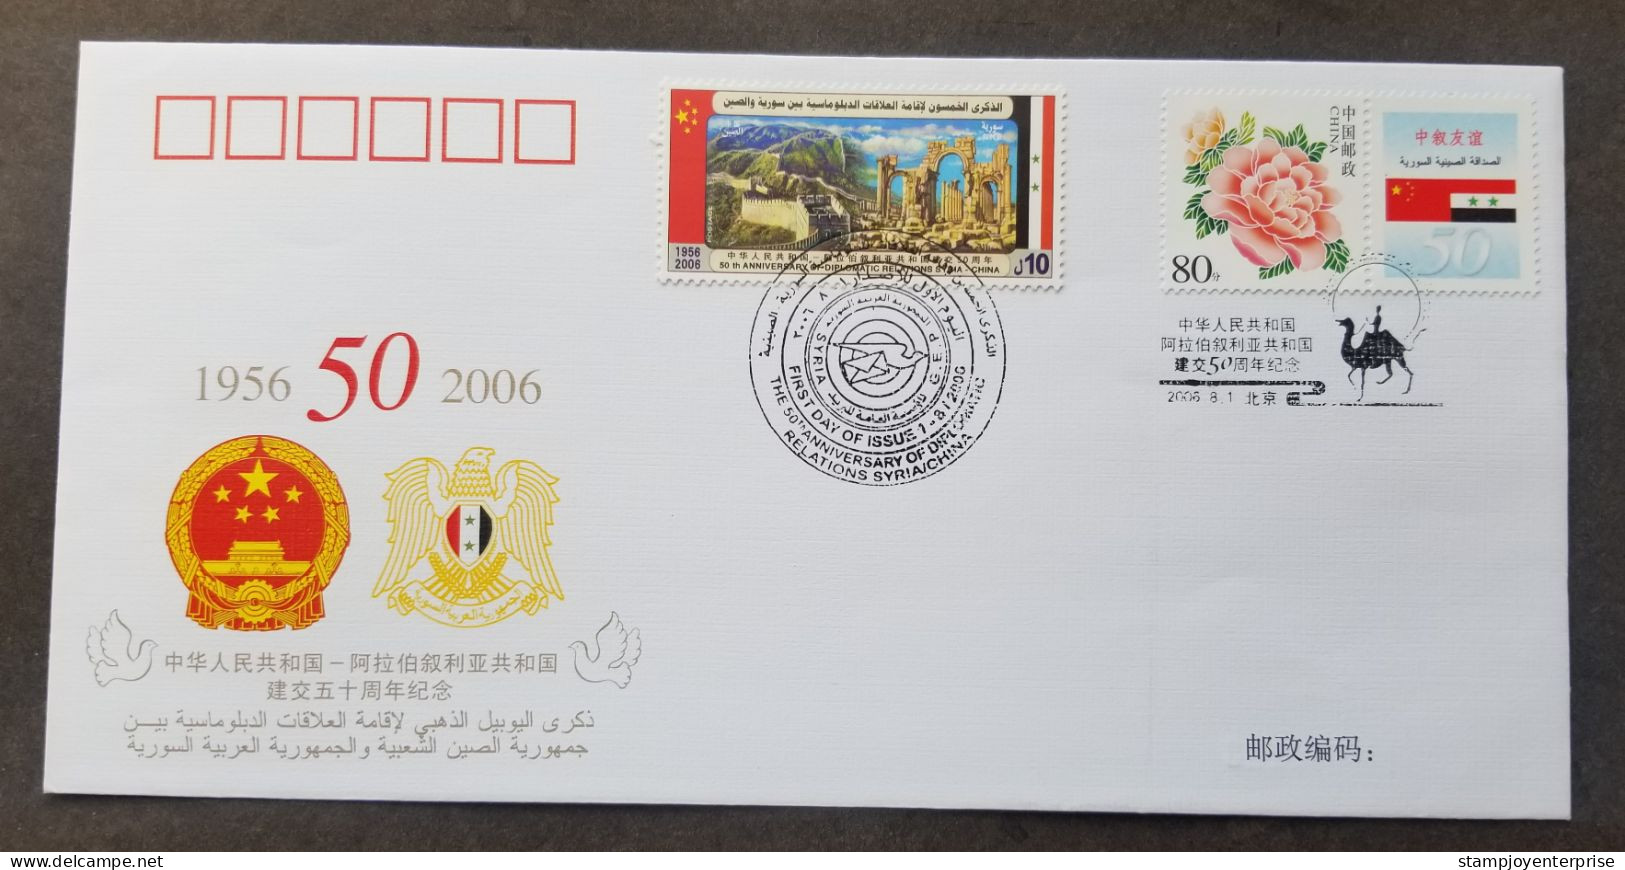 China Arab Syria 50th Diplomatic Issue 2006 Great Wall Flower (joint FDC) *dual PMK - Briefe U. Dokumente